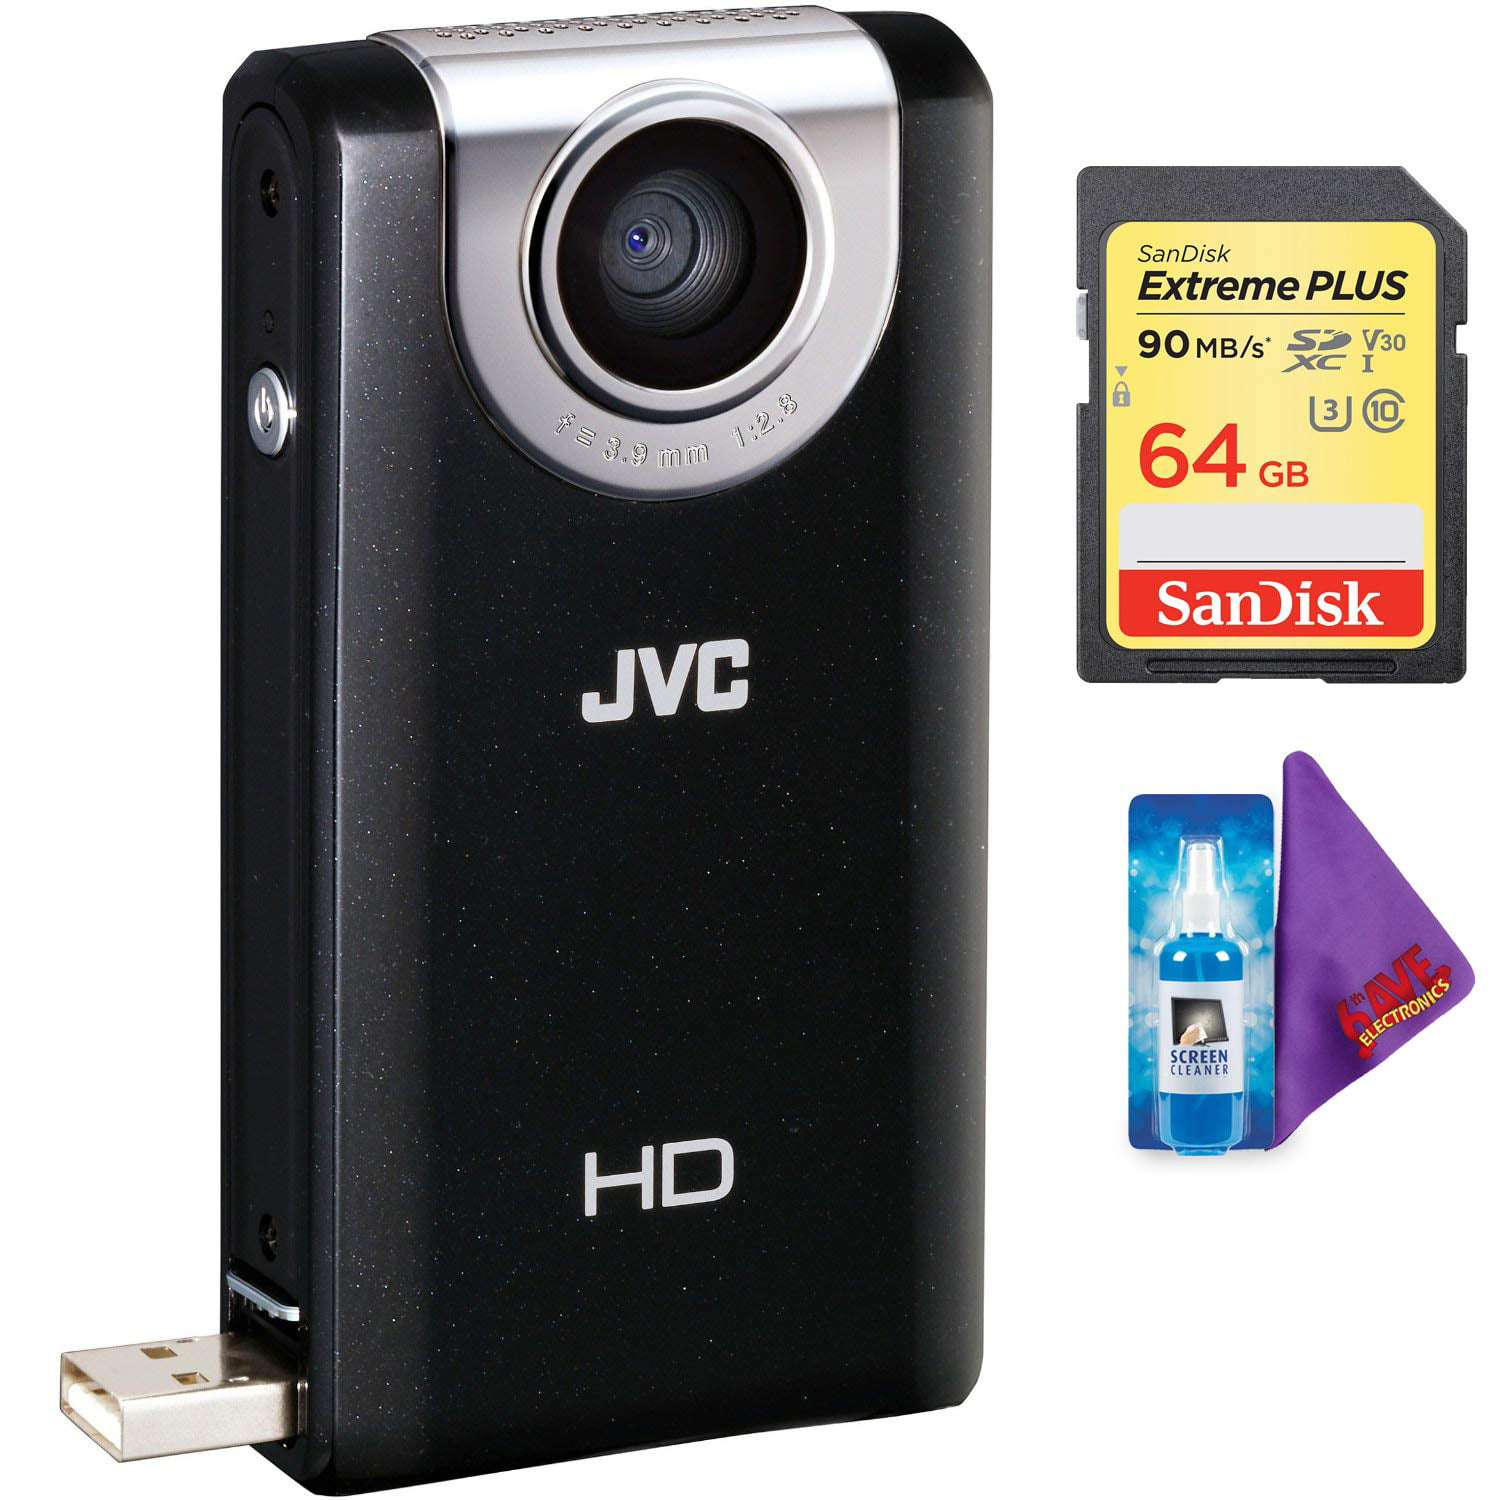 NEW 32GB Class 10 Speed SD SDHC MEMORY CARD FOR JVC Picsio GC-FM2 HD Pocket Cam CAMCORDER